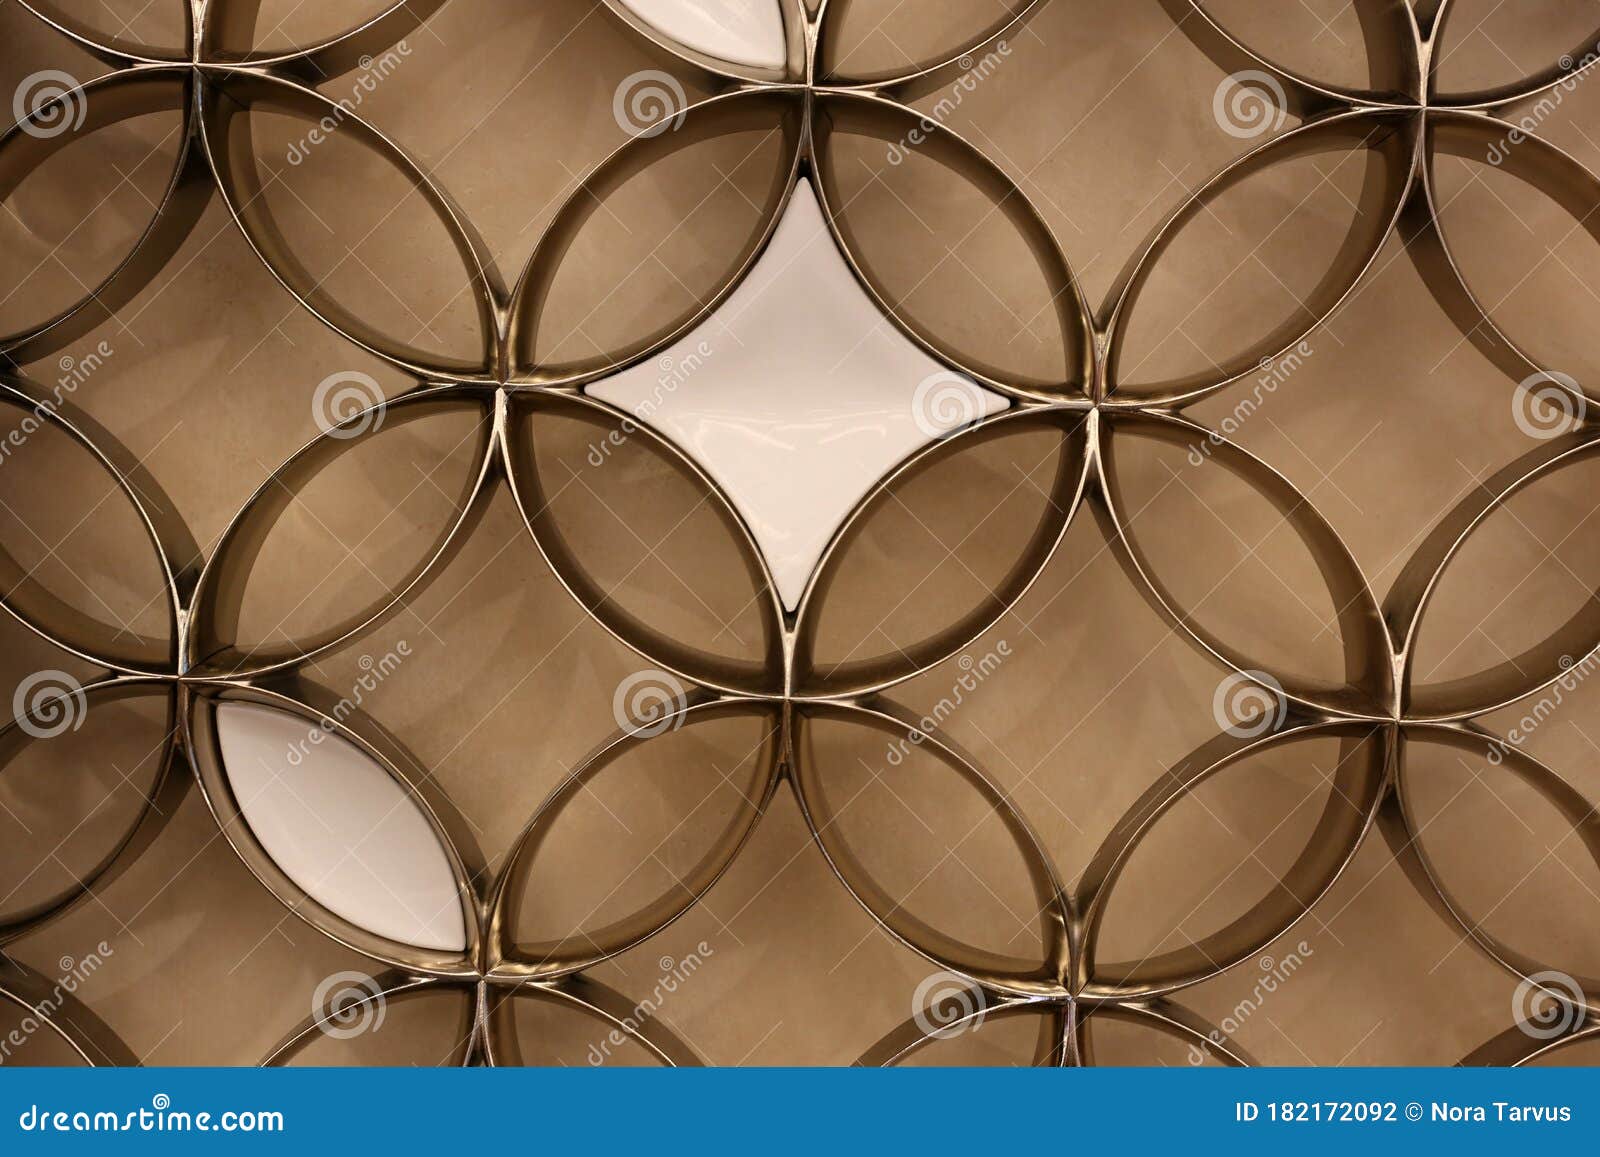 Closeup of Luxurious Gold, Brown & White Louis Vuitton Retail Store Wall in  Dubai, UAE Editorial Photography - Image of detail, editorial: 182172092